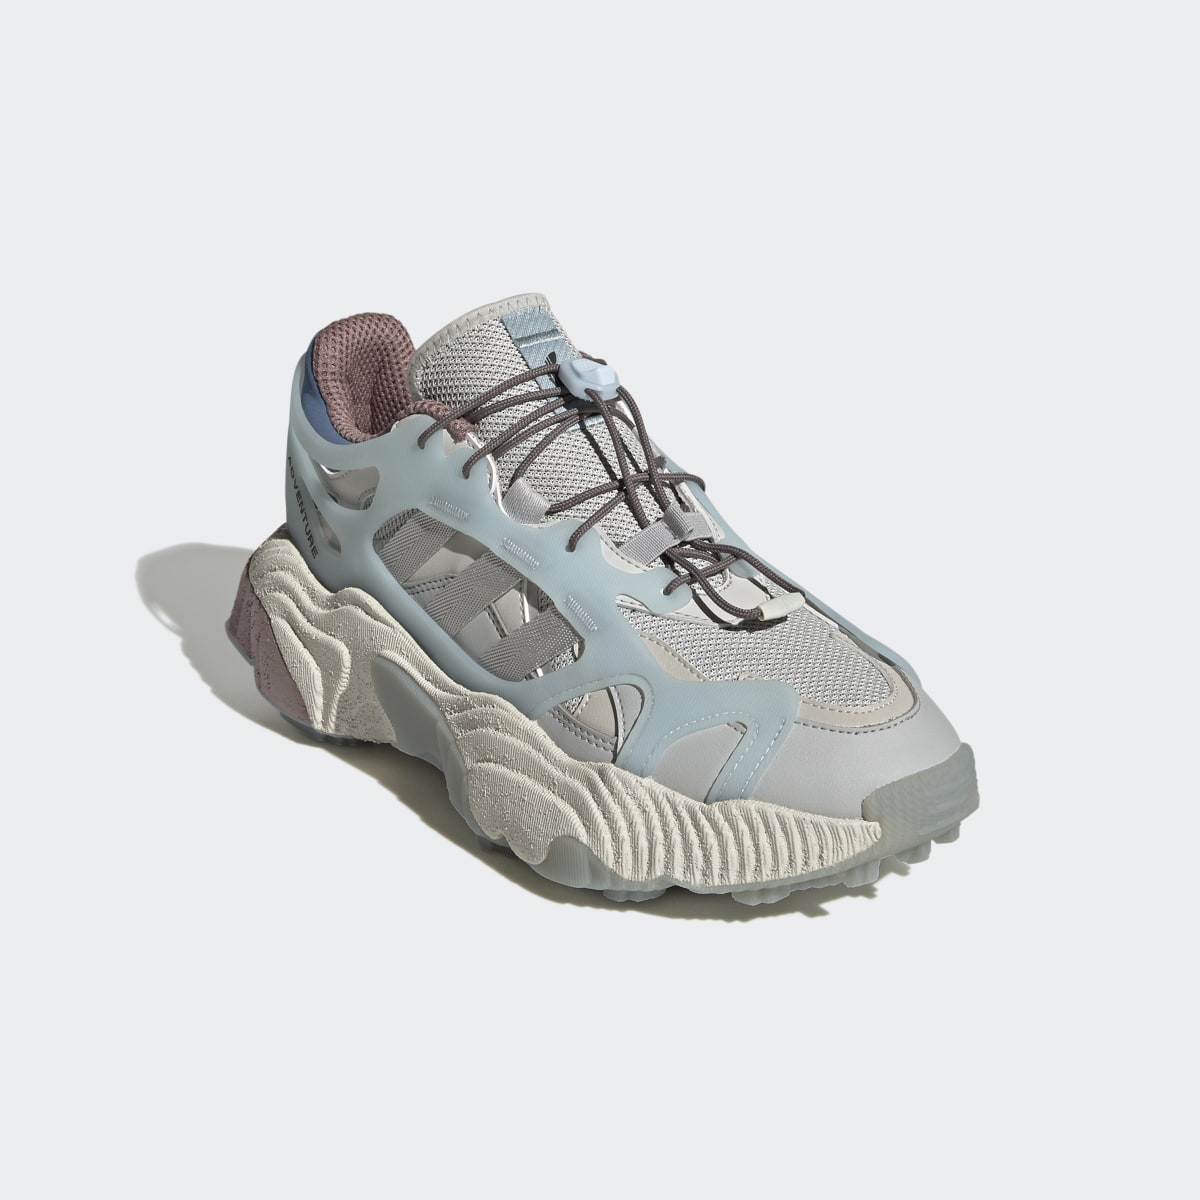 Adidas Roverend Adventure Shoes. 5